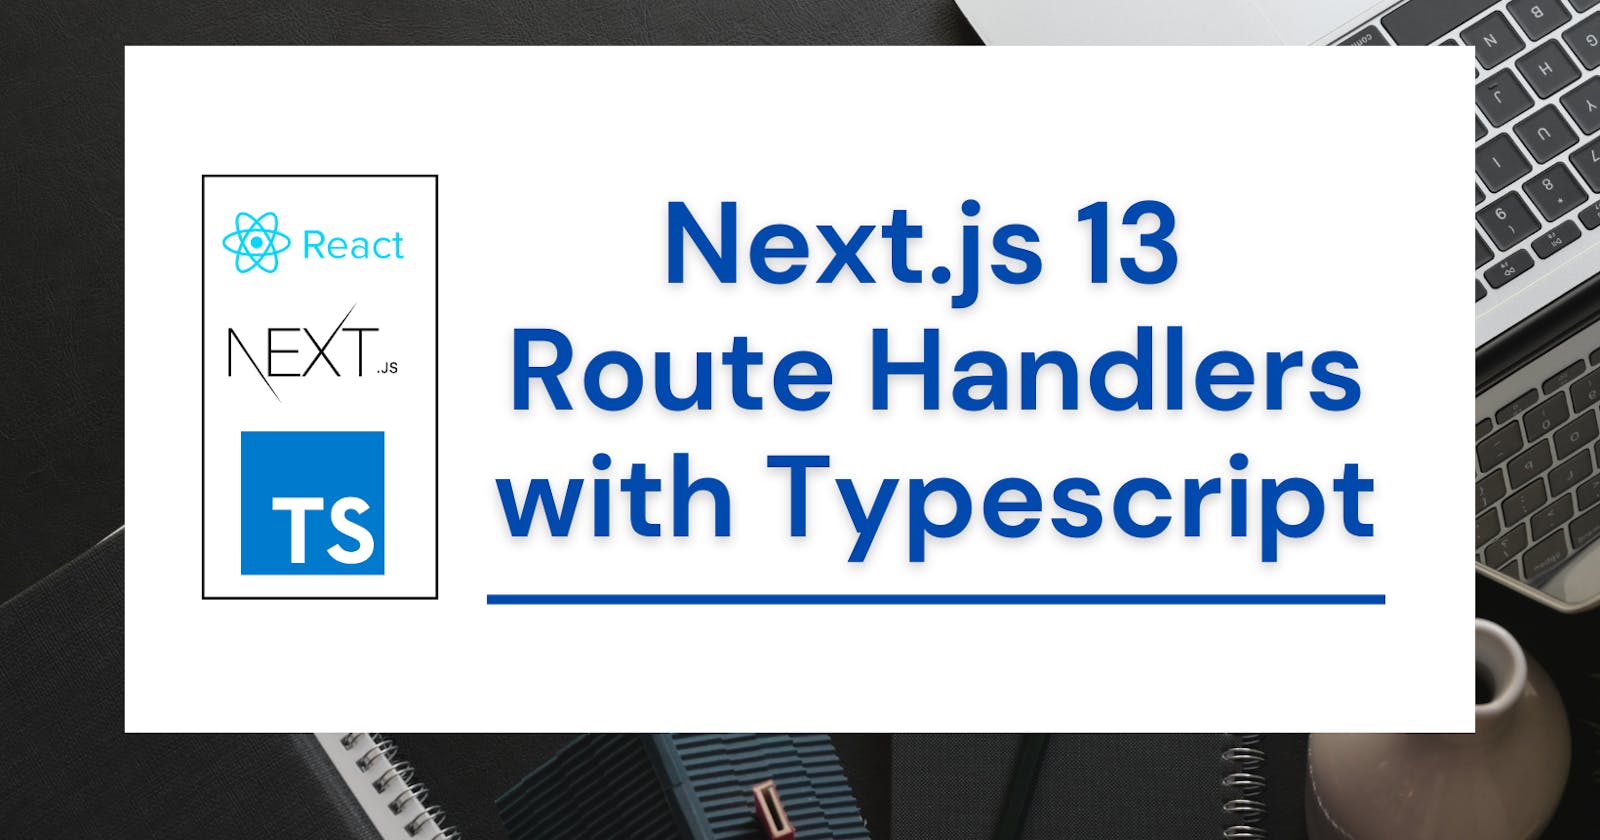 Next.js 13 Route Handlers with Typescript